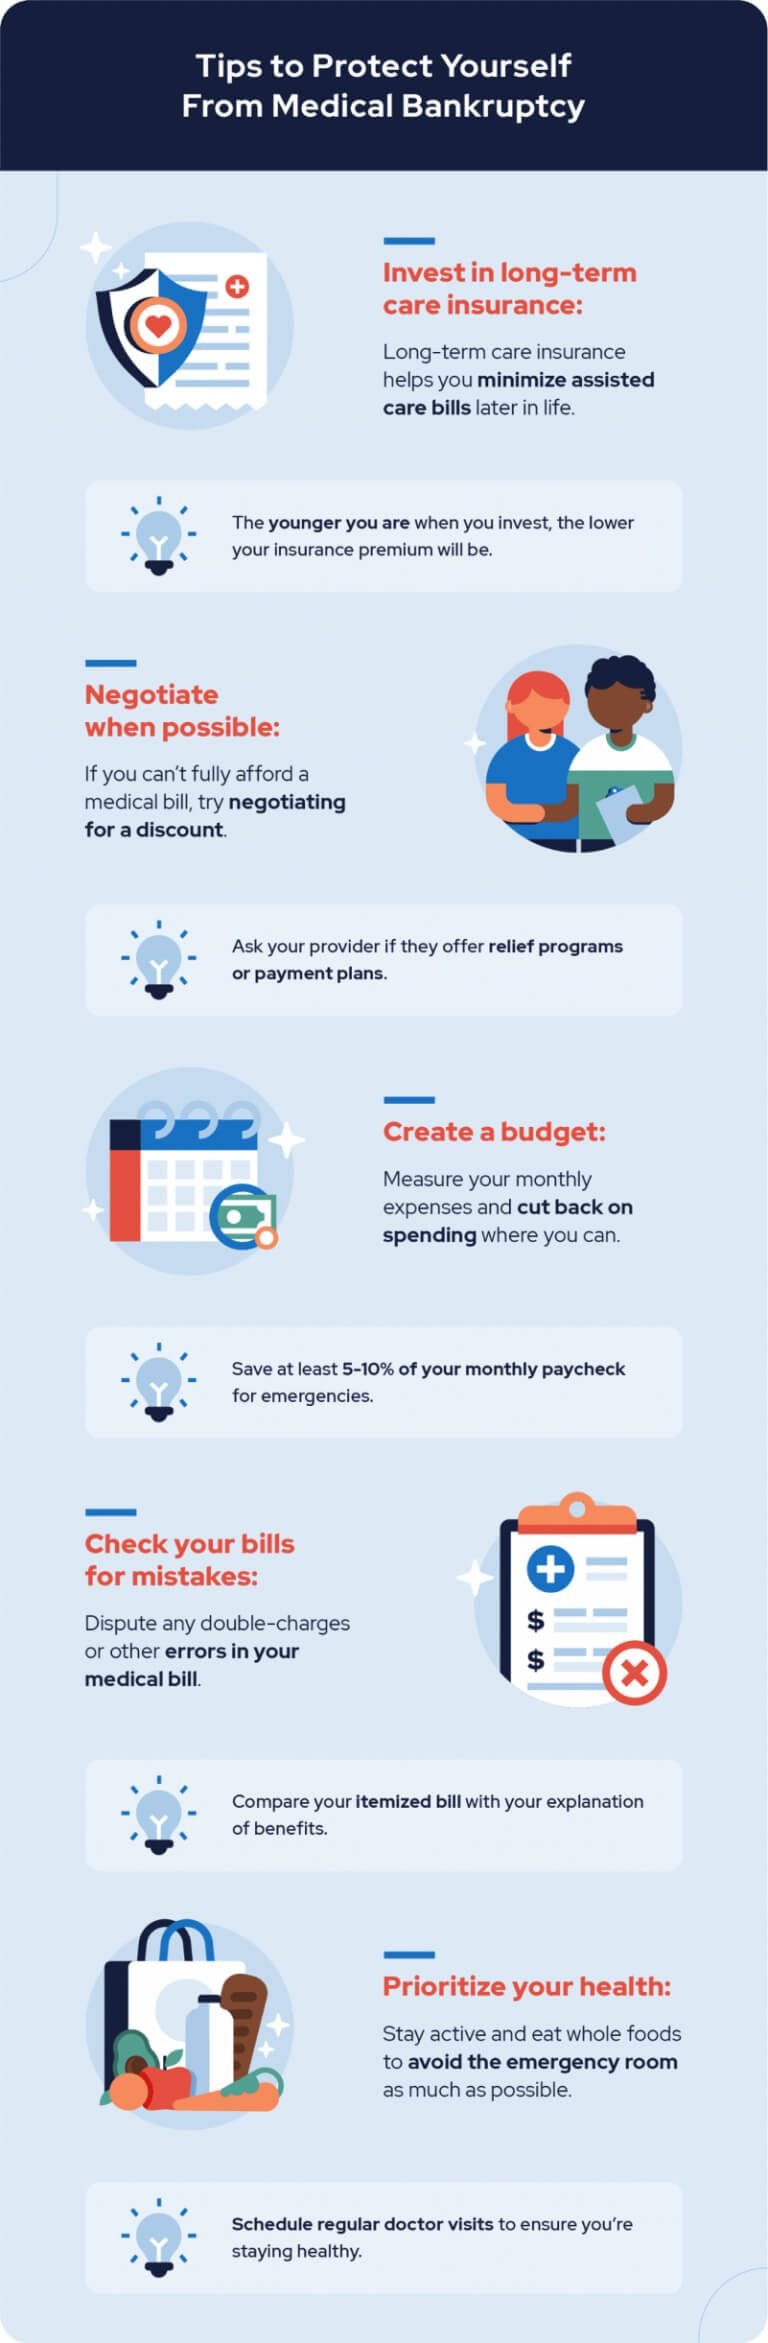 Infographic on Tips to Protect Yourself from Medical Bankruptcy